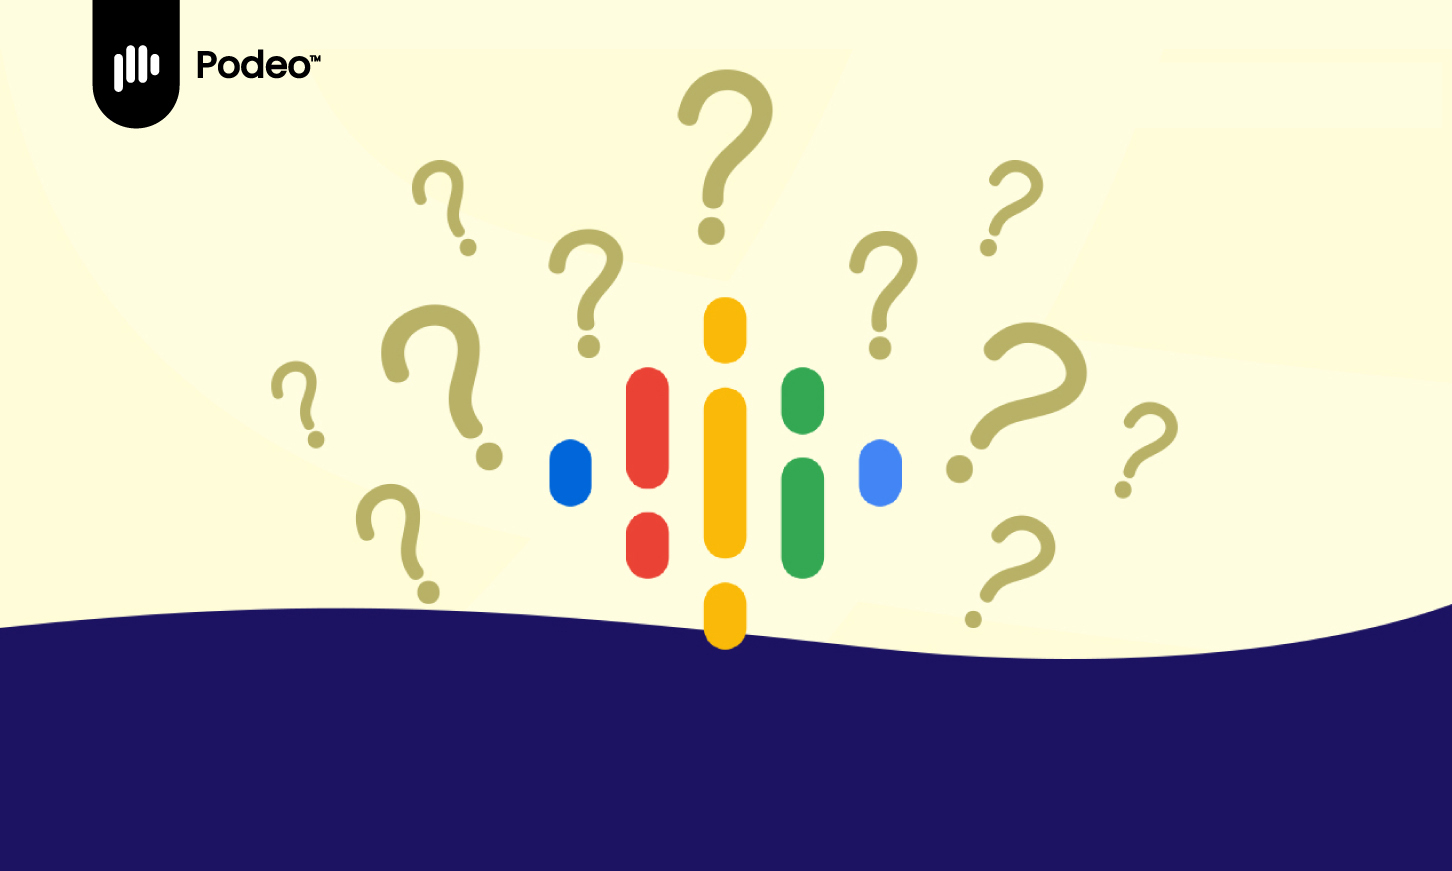 GOOGLE PODCASTS LOGO and question marks on faded yellow and navy blue background